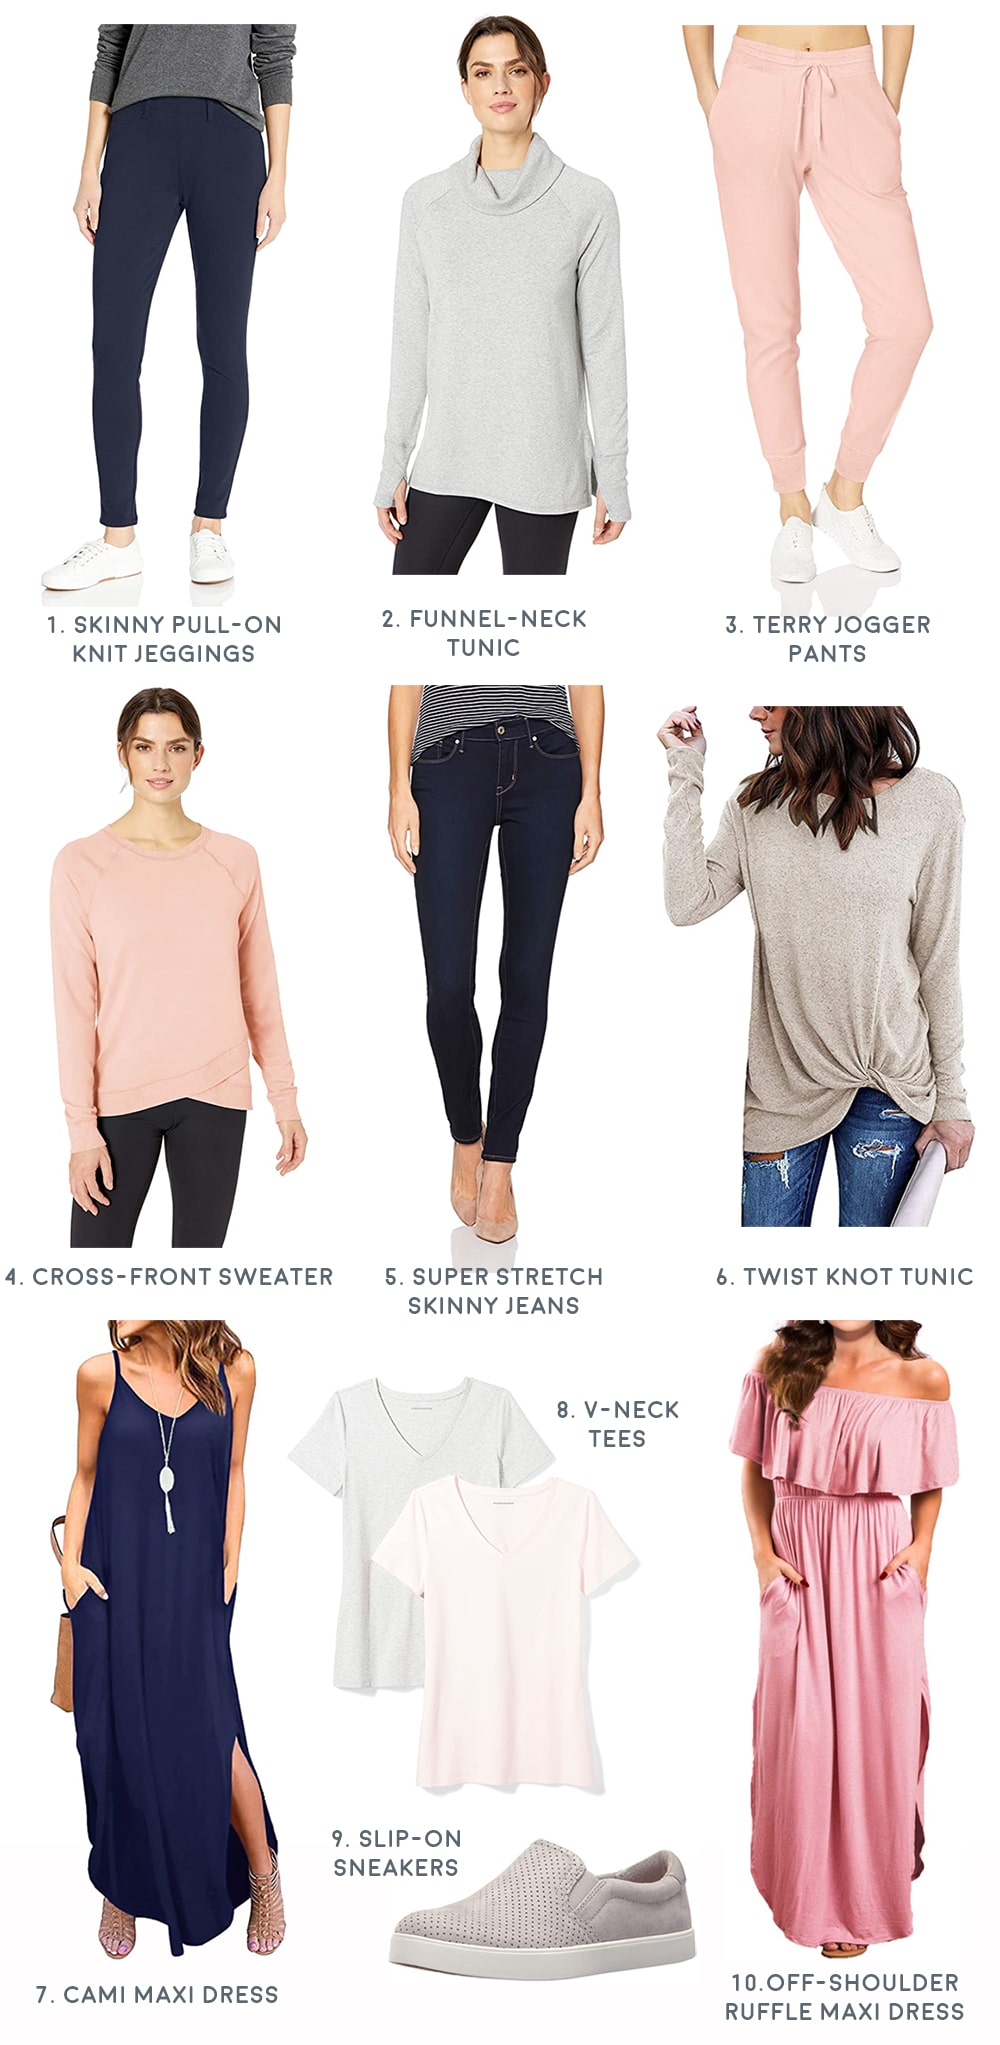 Affordable fashion blogger Stephanie Ziajka shares the top work from home loungewear on Amazon on Diary of a Debutante